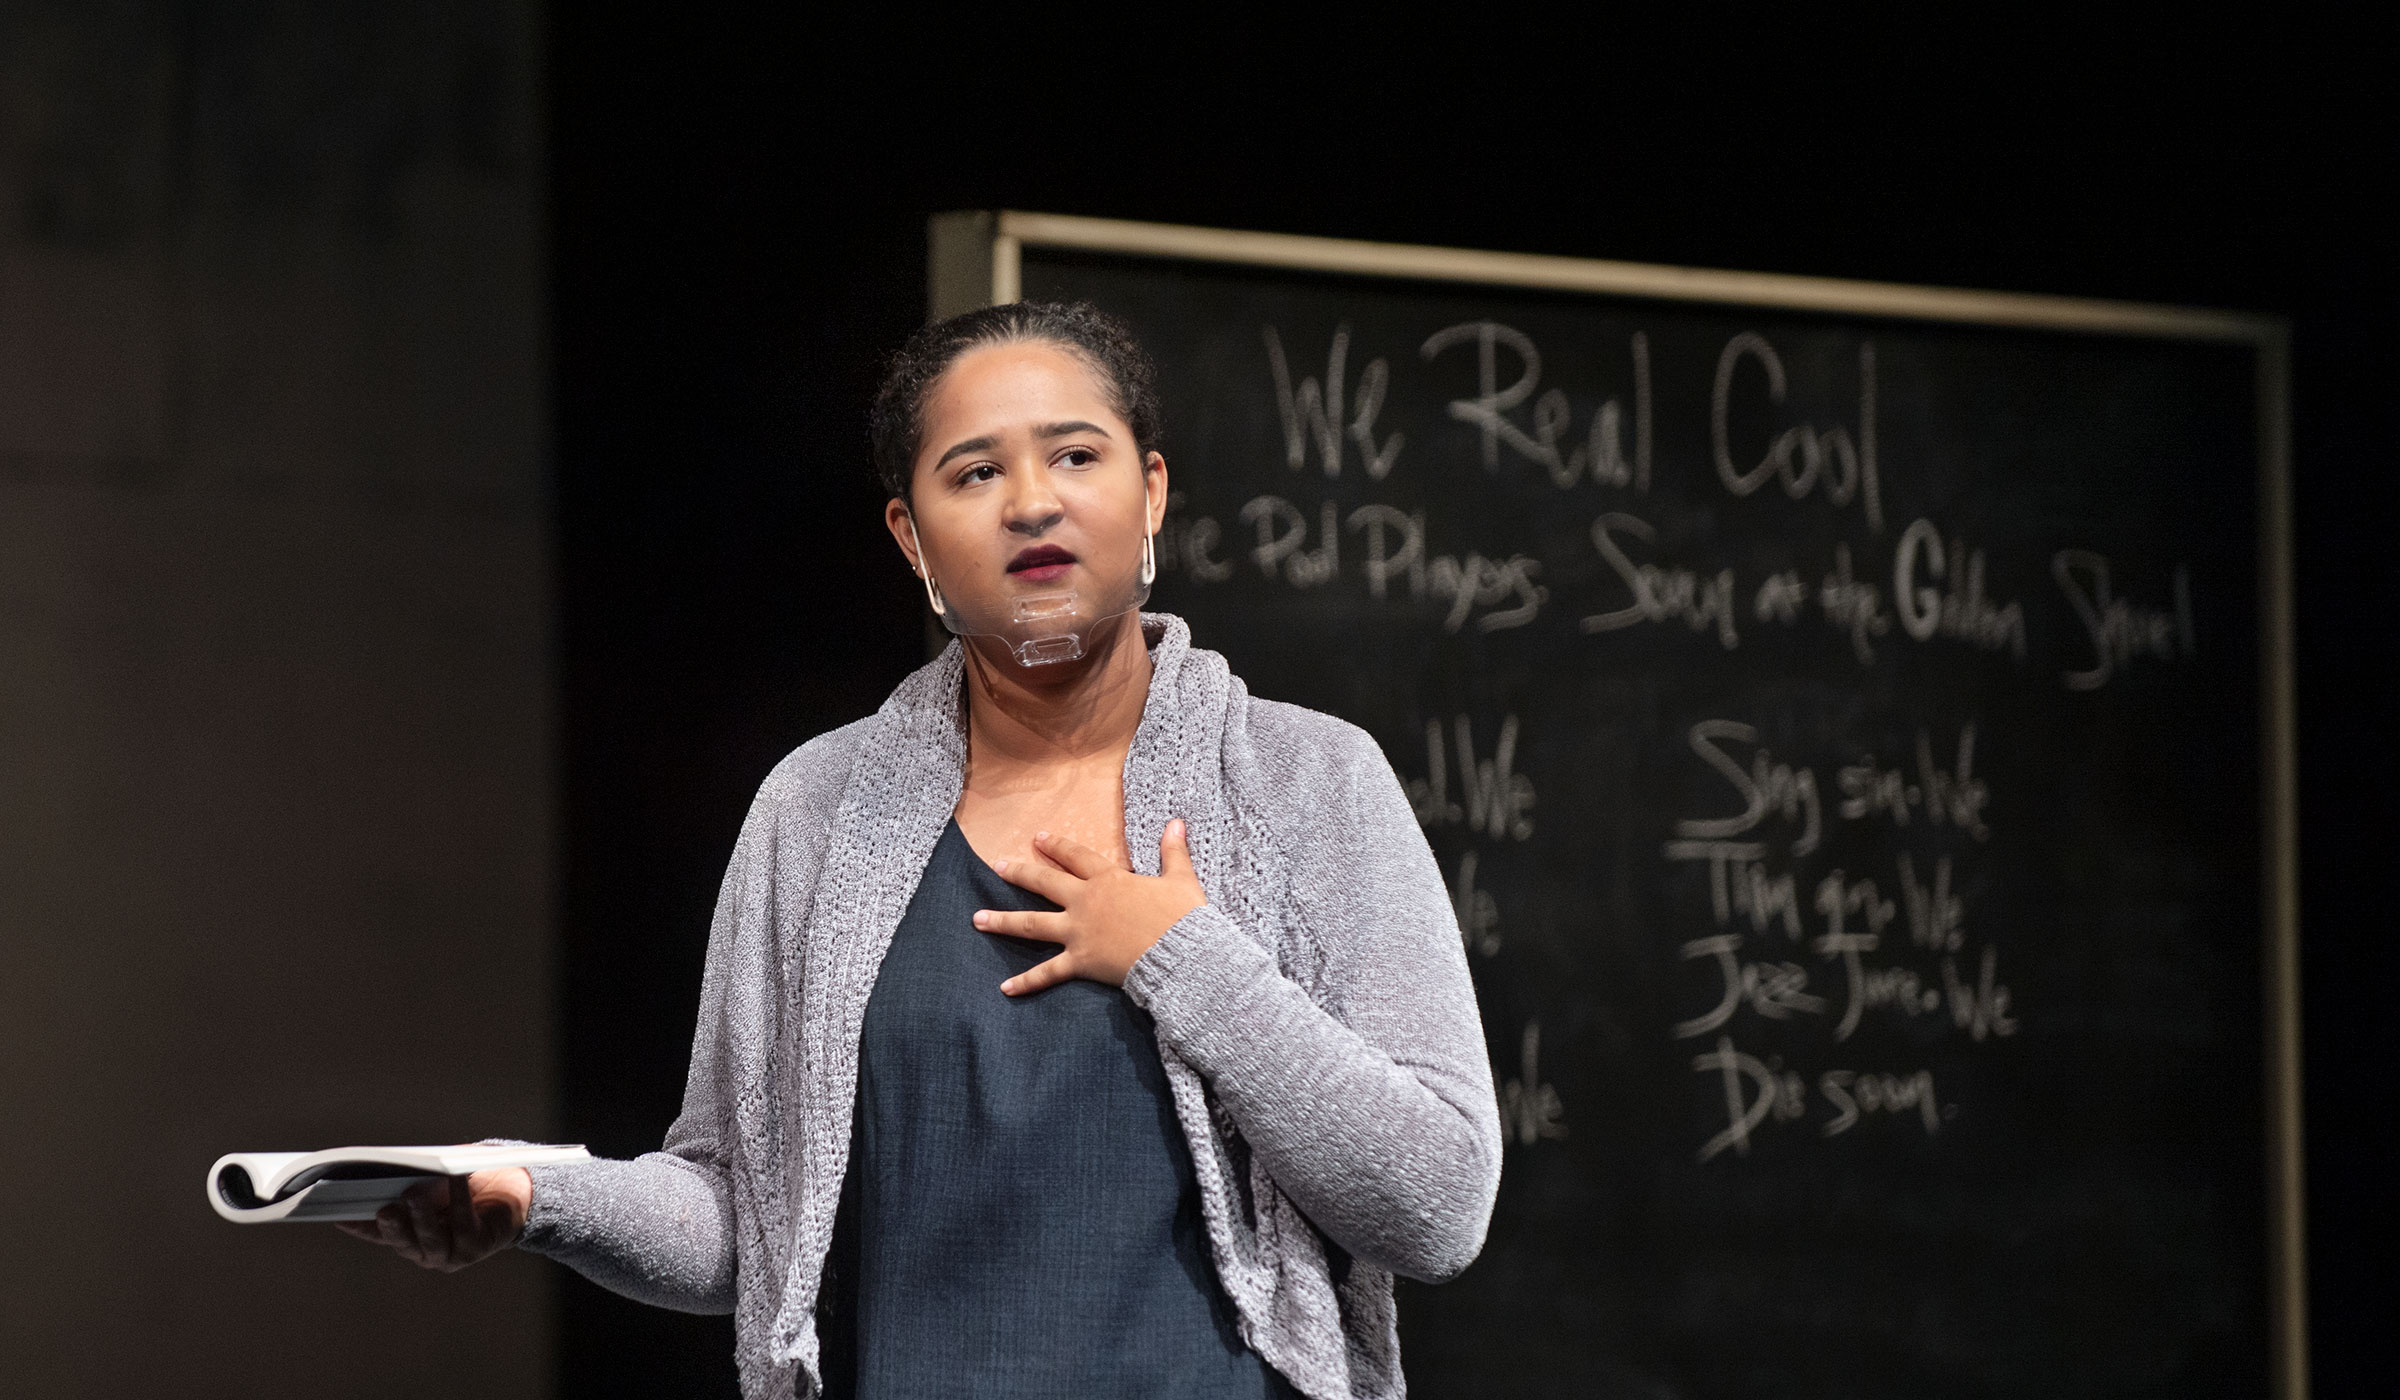 Theatre MSU student actress Preslie Cowley plays the lead character, Nye, teaching in front of a blackboard in the play &quot;Pipeline.&quot;